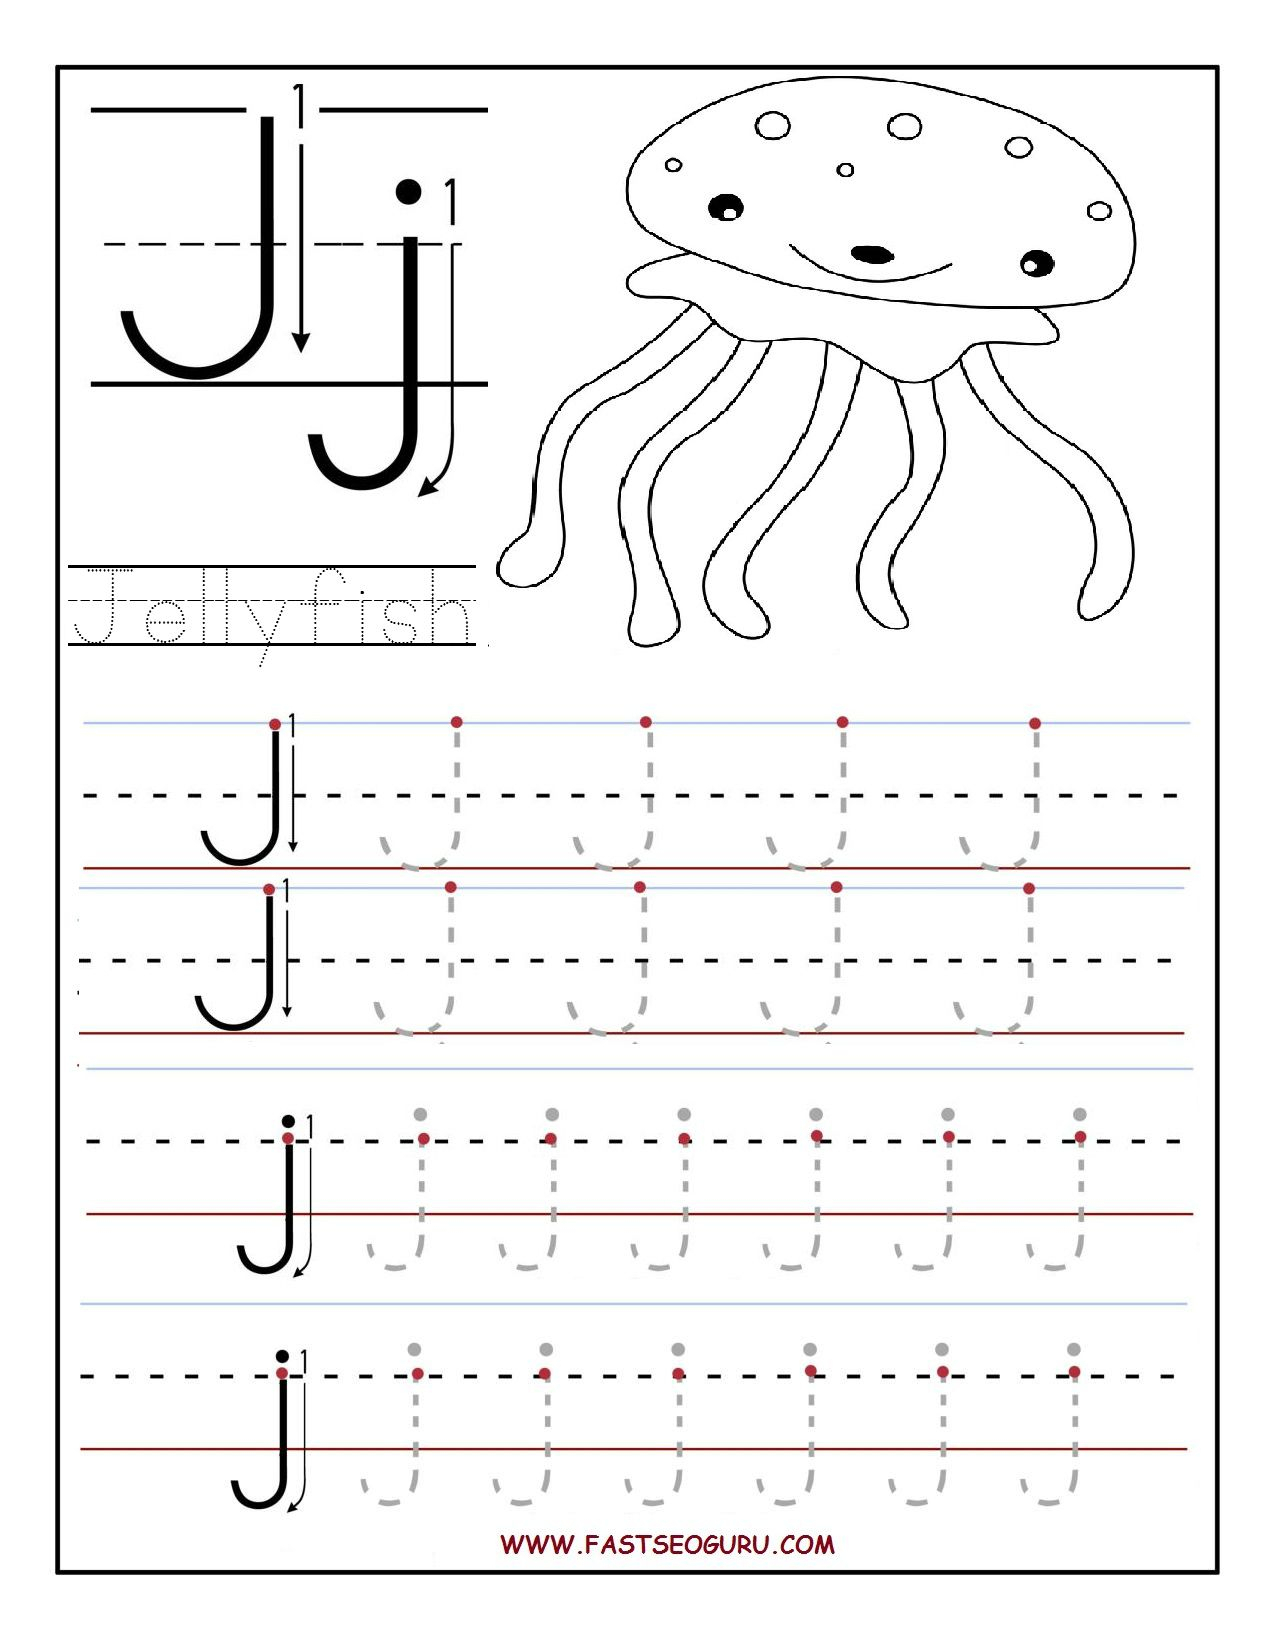 Pin About Preschool Worksheets, Preschool Writing And Kids intended for Letter J Worksheets For Toddlers